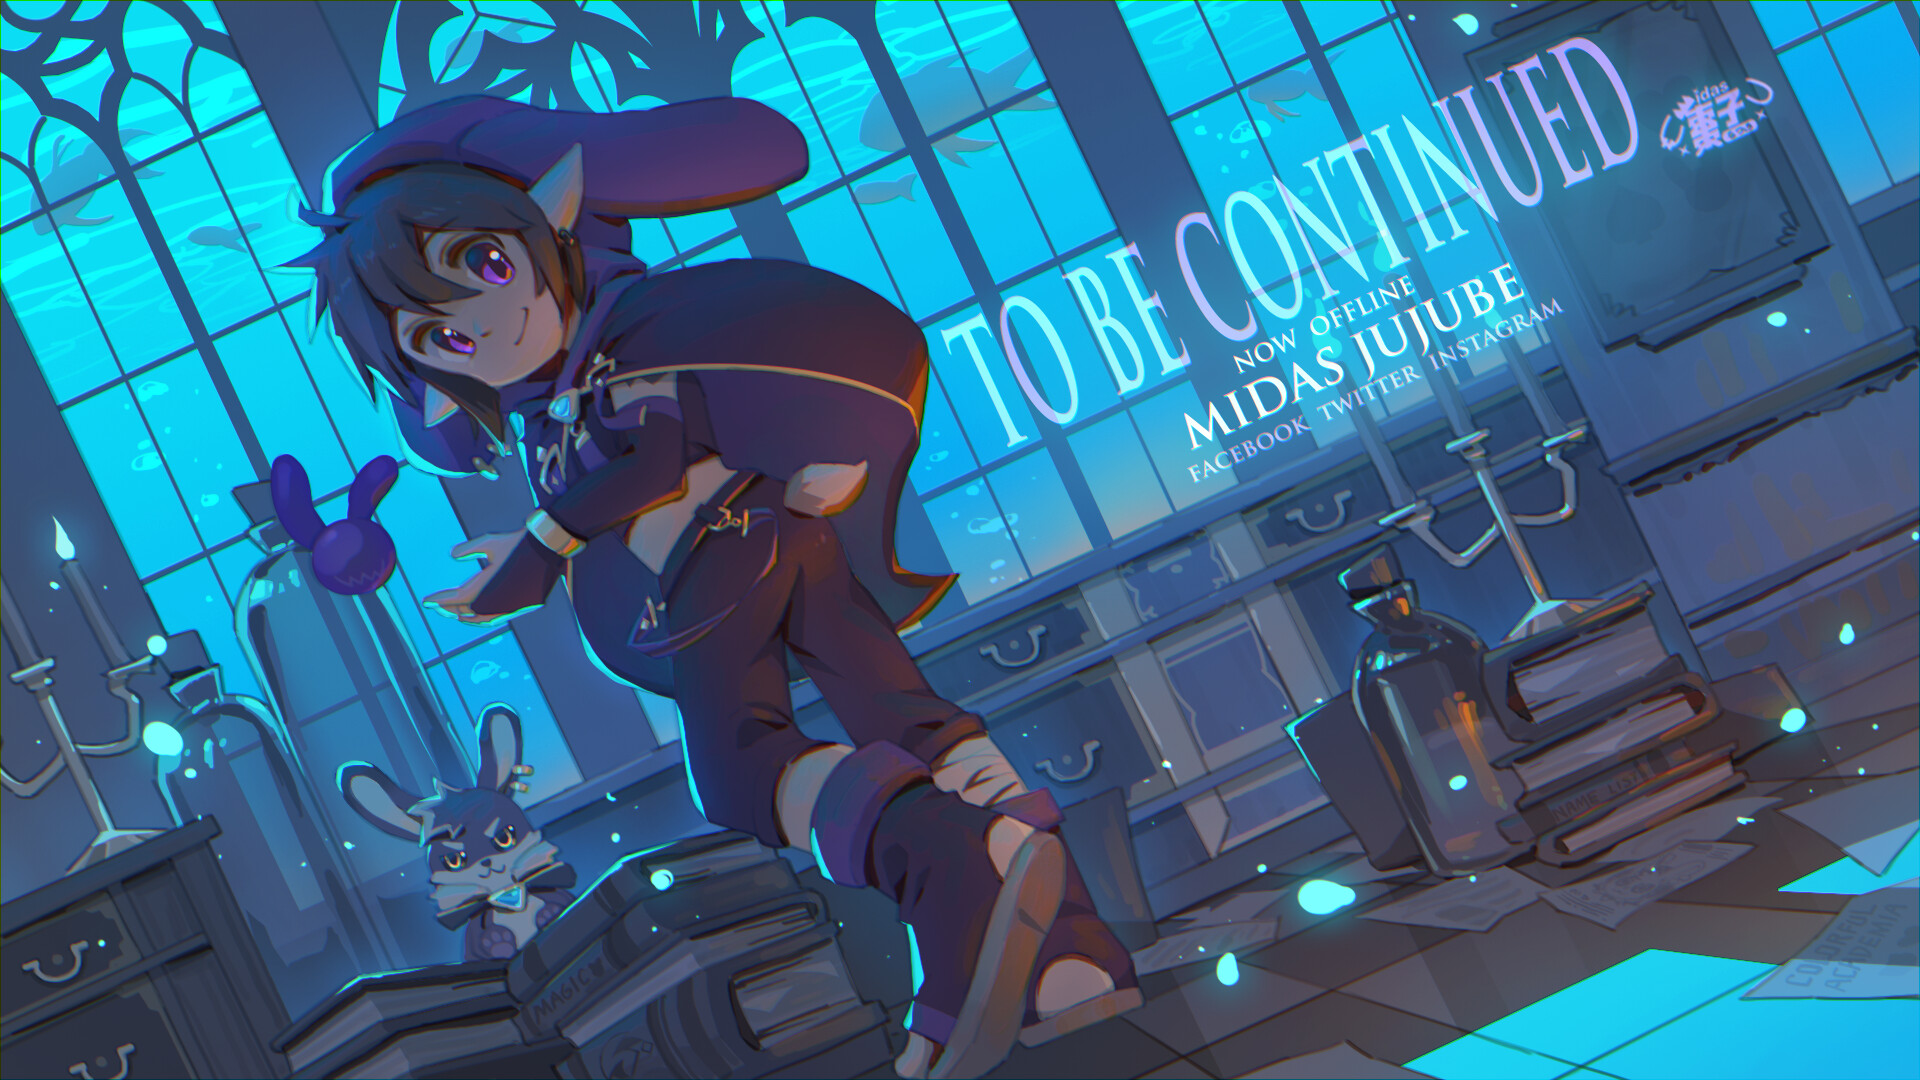 ArtStation - 【Commission】To Be Continued